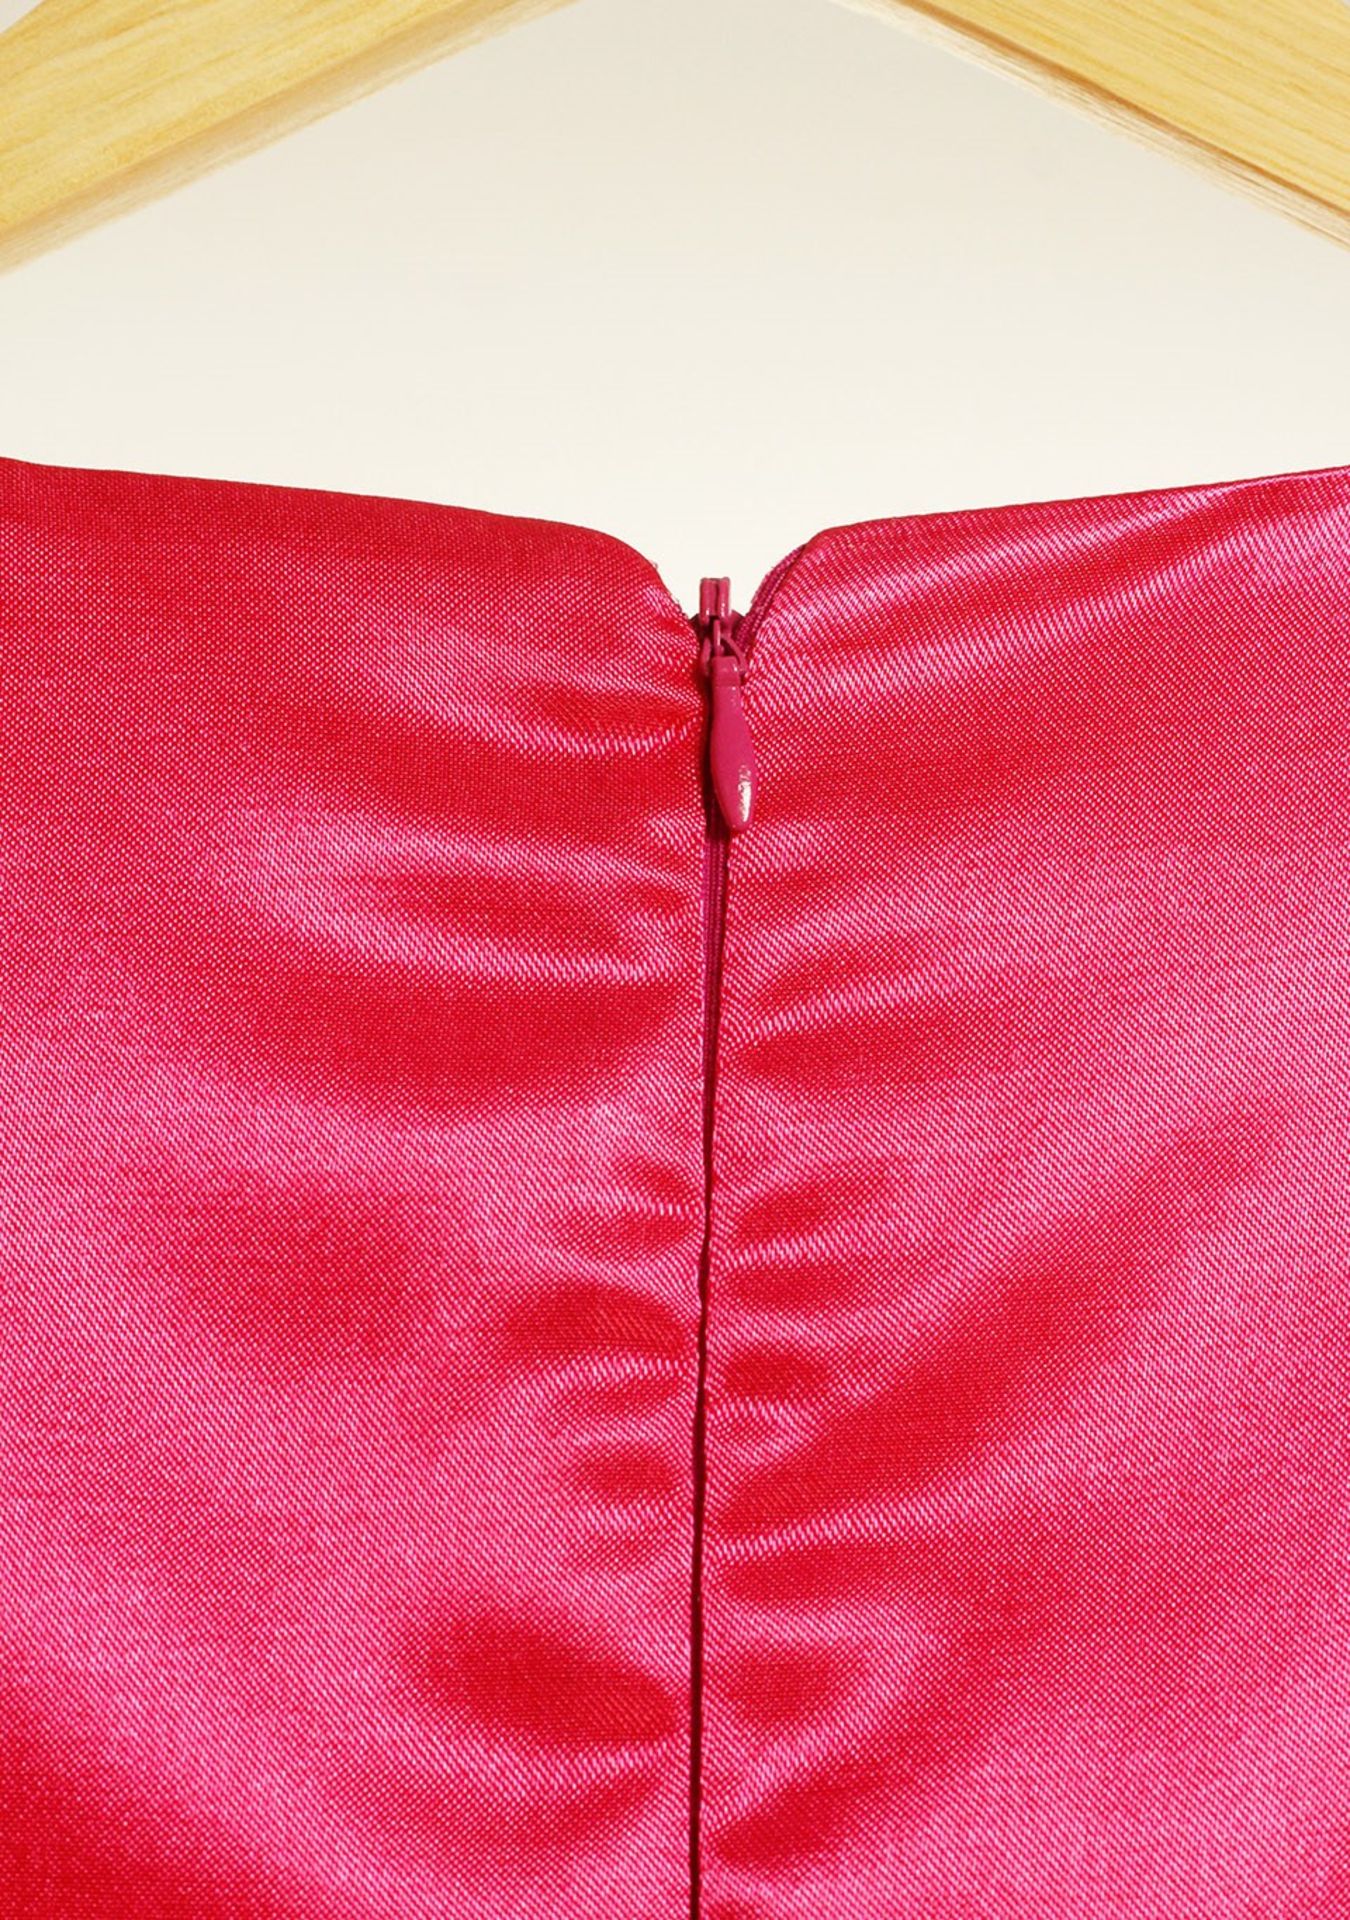 1 x Boutique Le Duc Fuschia Vest - From a High End Clothing Boutique In The - Image 10 of 10